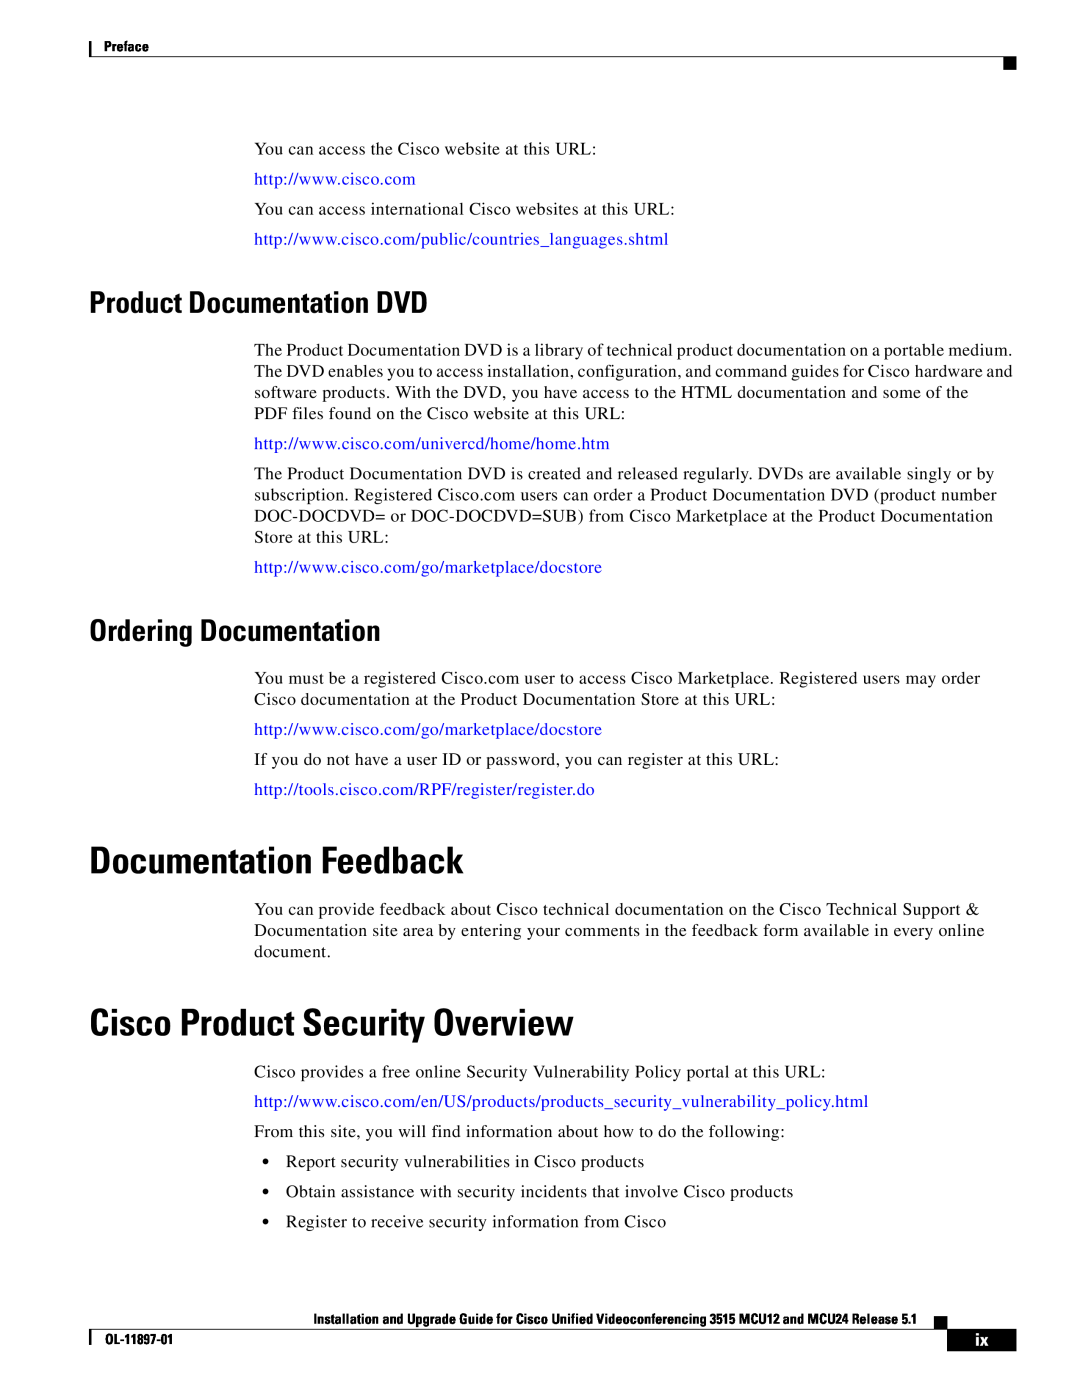 Cisco Systems MCU24 manual Documentation Feedback, Cisco Product Security Overview, Product Documentation DVD 